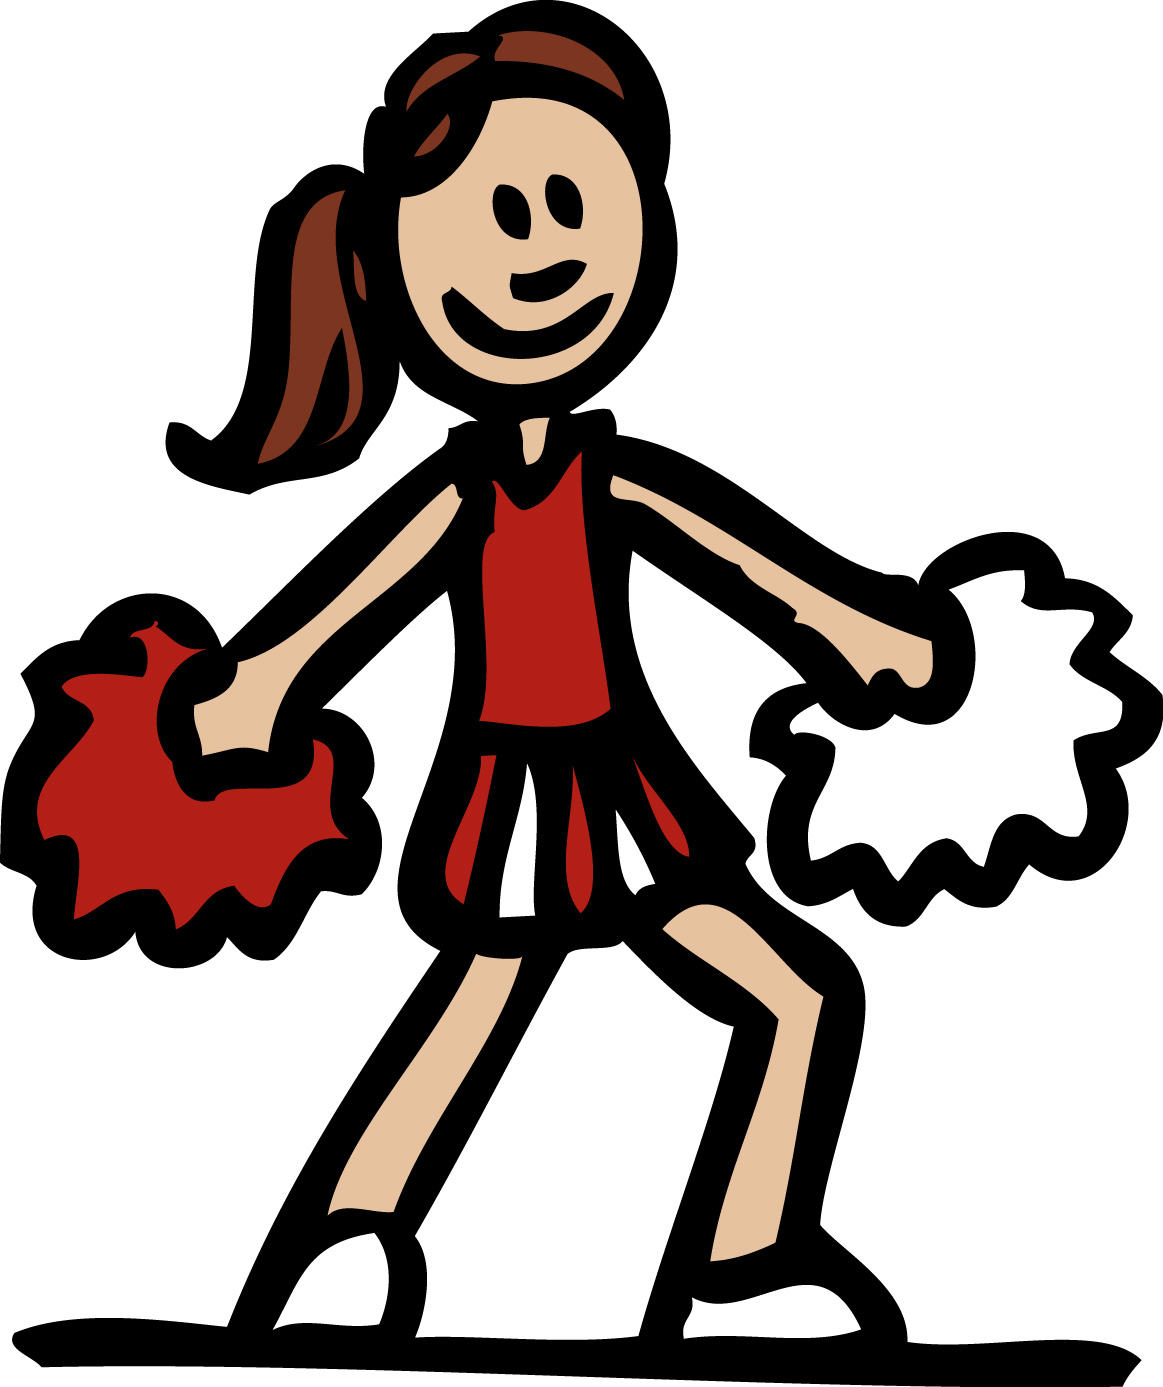 Cheerleading Clipart Images - ClipArt Best